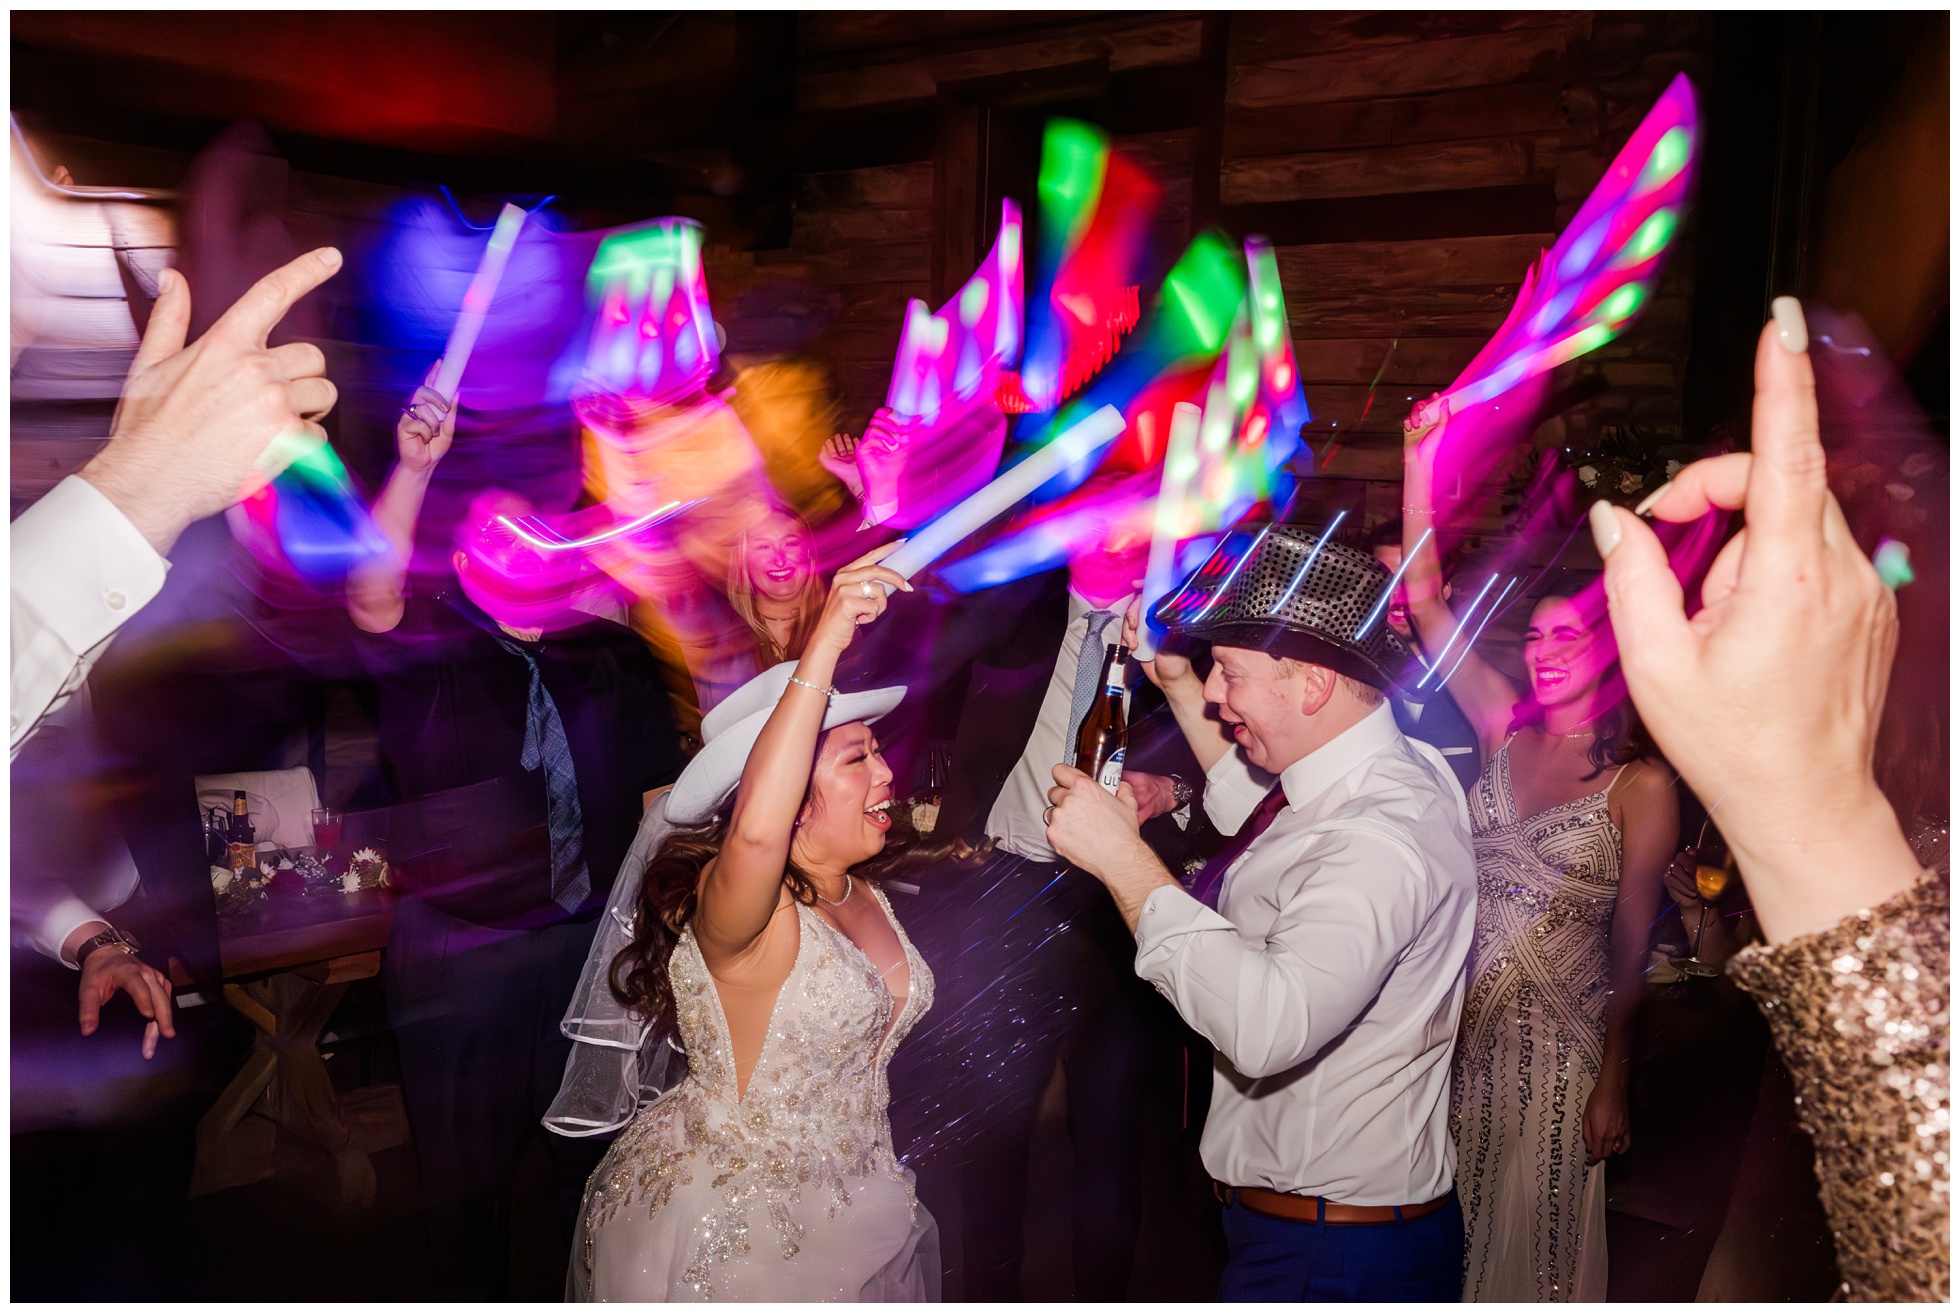 lights and color swirl around dancing bride and groom with hats during wedding reception at Big Sky Barn.